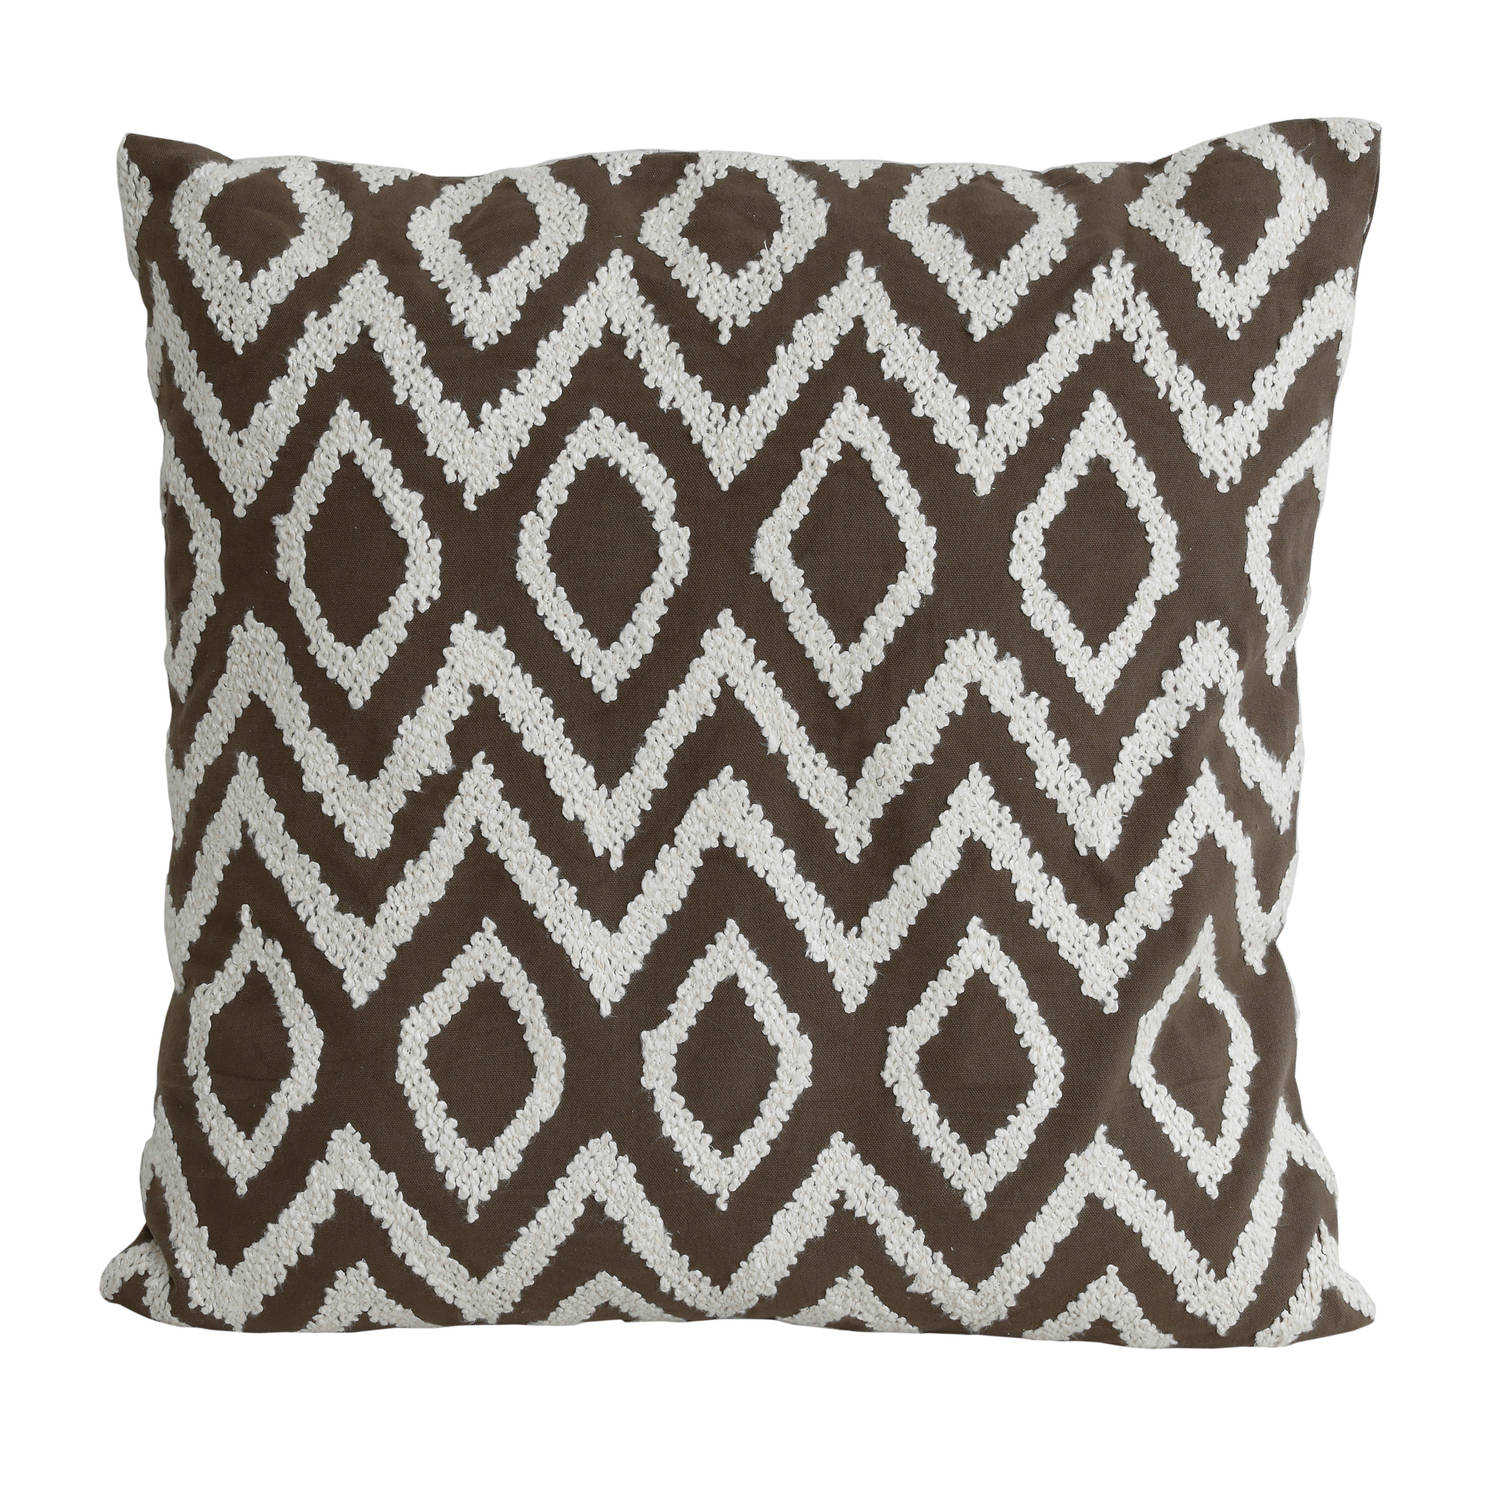 PTMD Cecile Taupe cotton cushion triangle pattern squar